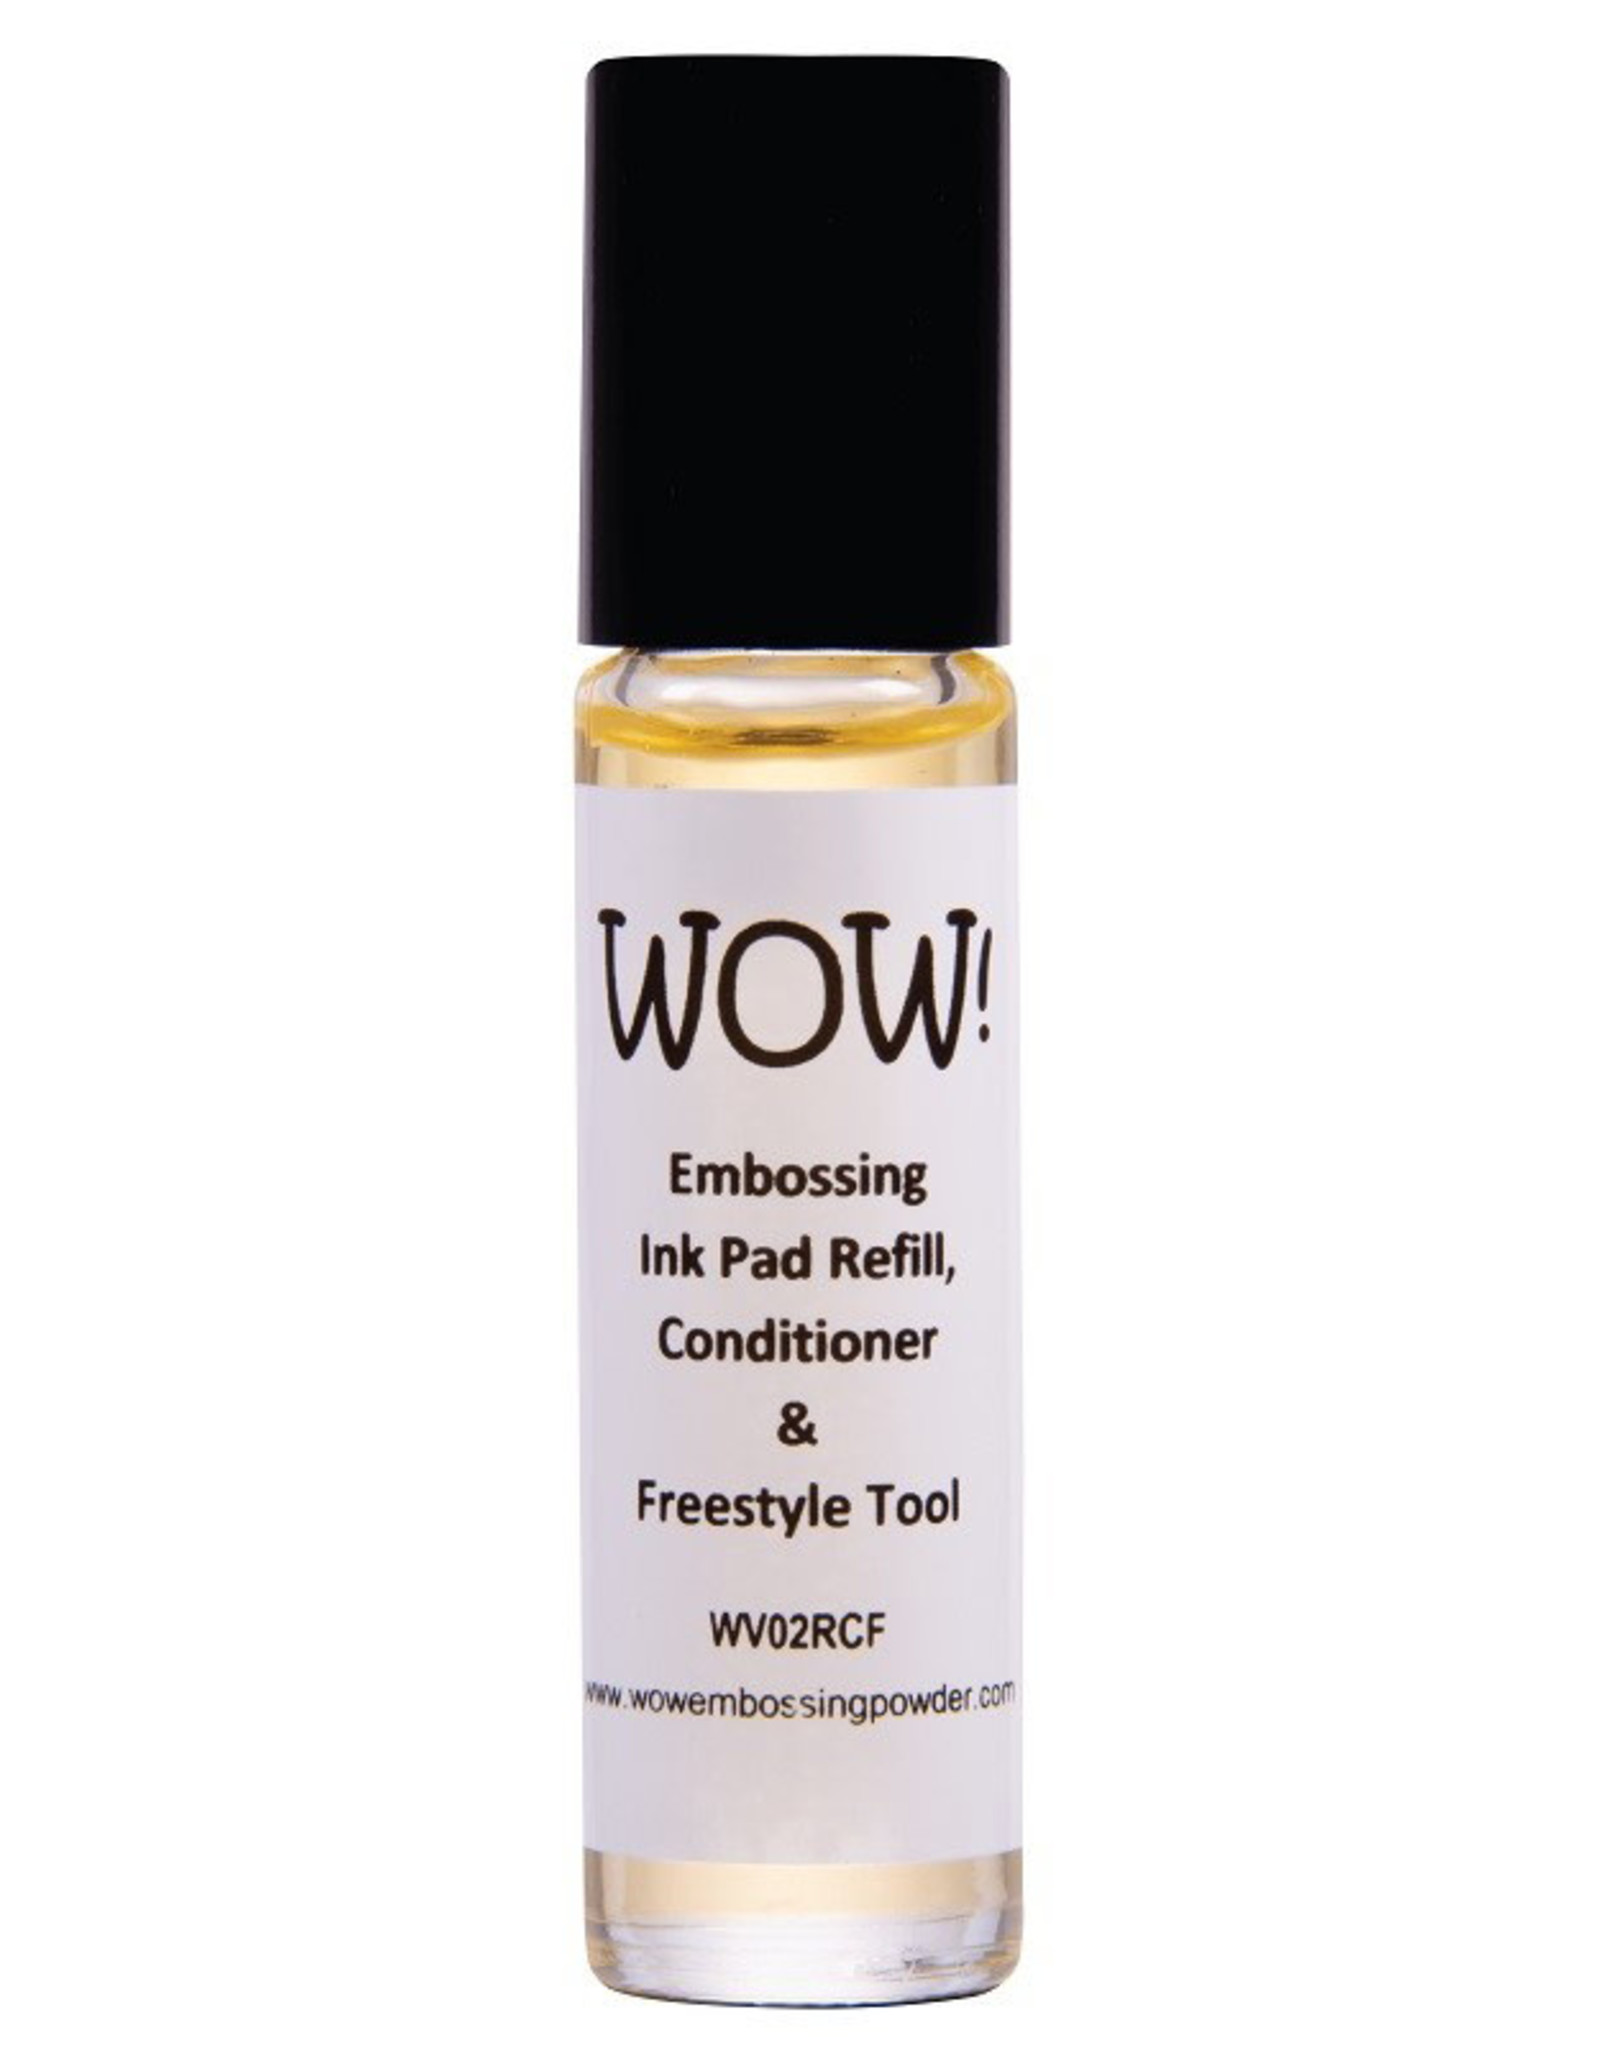 WOW! WOW! EMBOSSING INK PAD REFILL, CONDITIONER & FREESTYLE TOOL